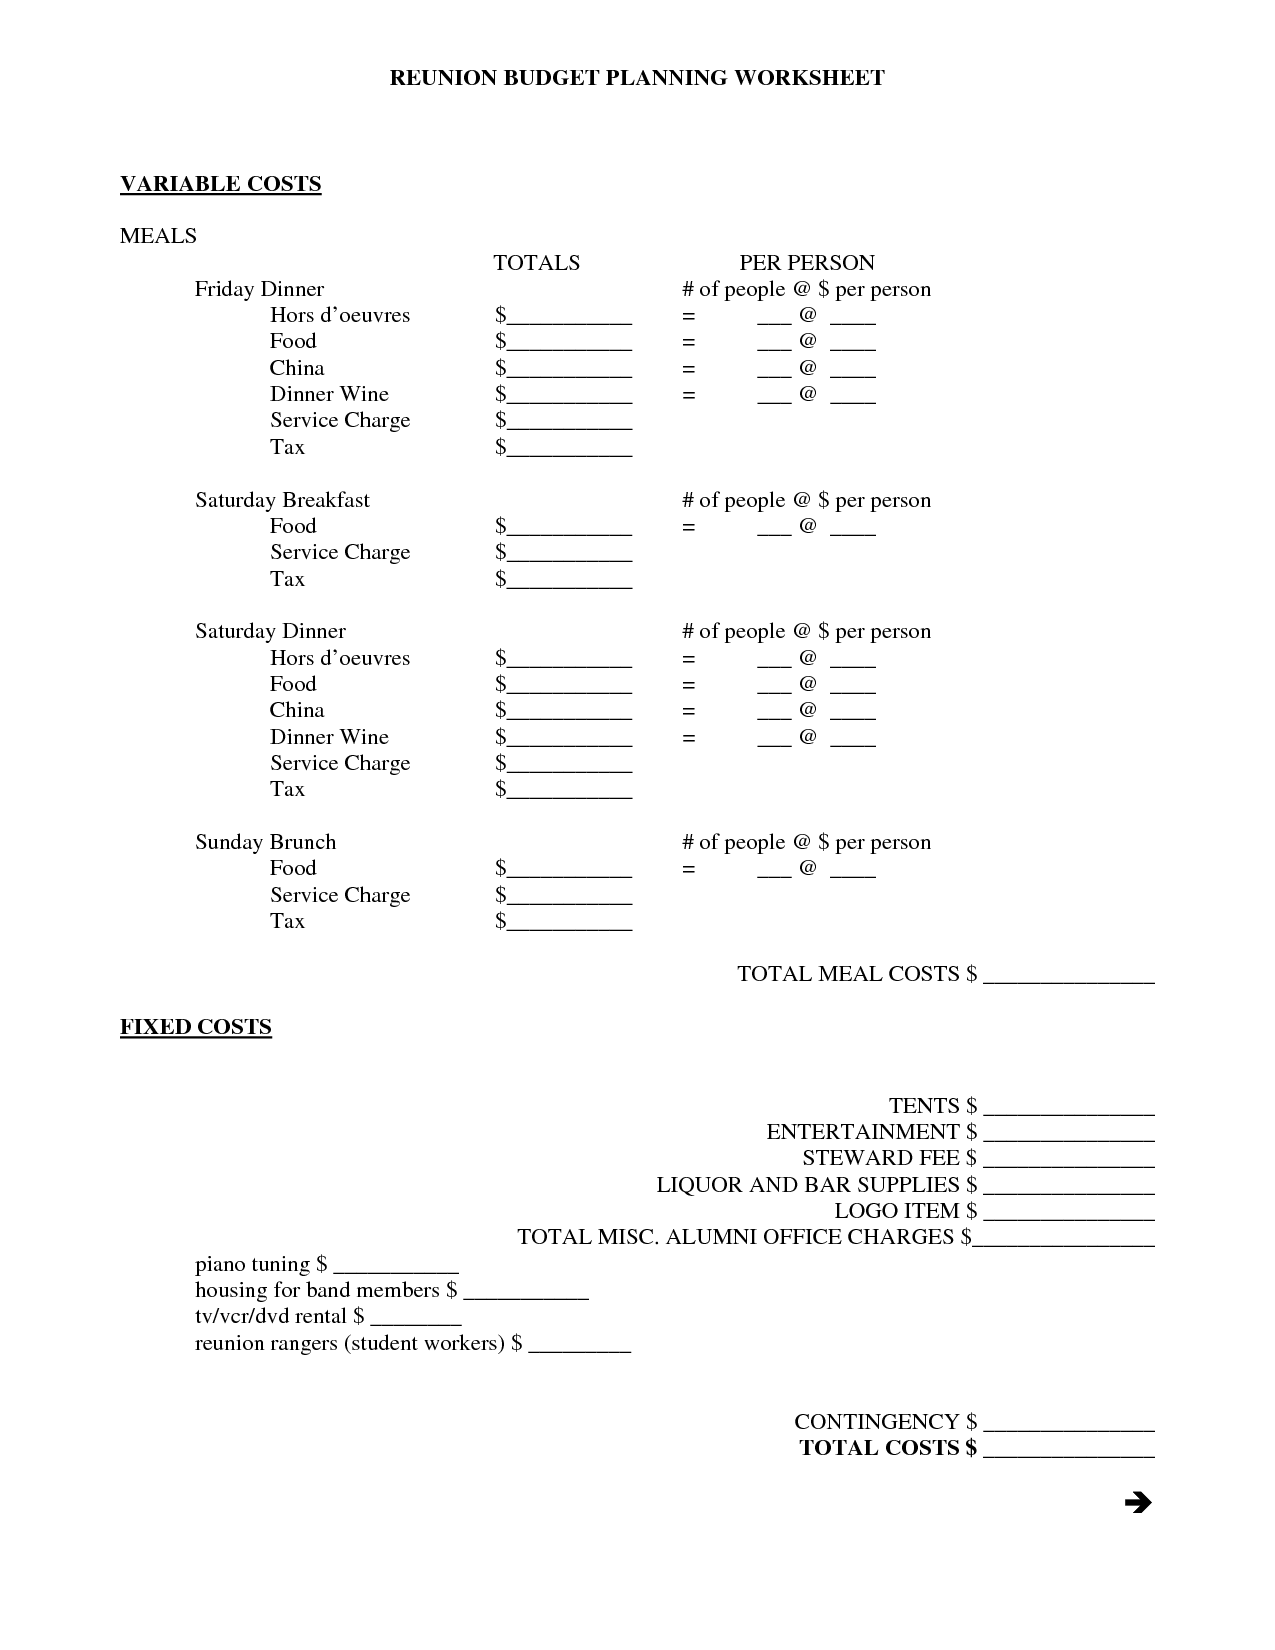 12 Best Images of Family Reunion Budget Worksheet Family Reunion